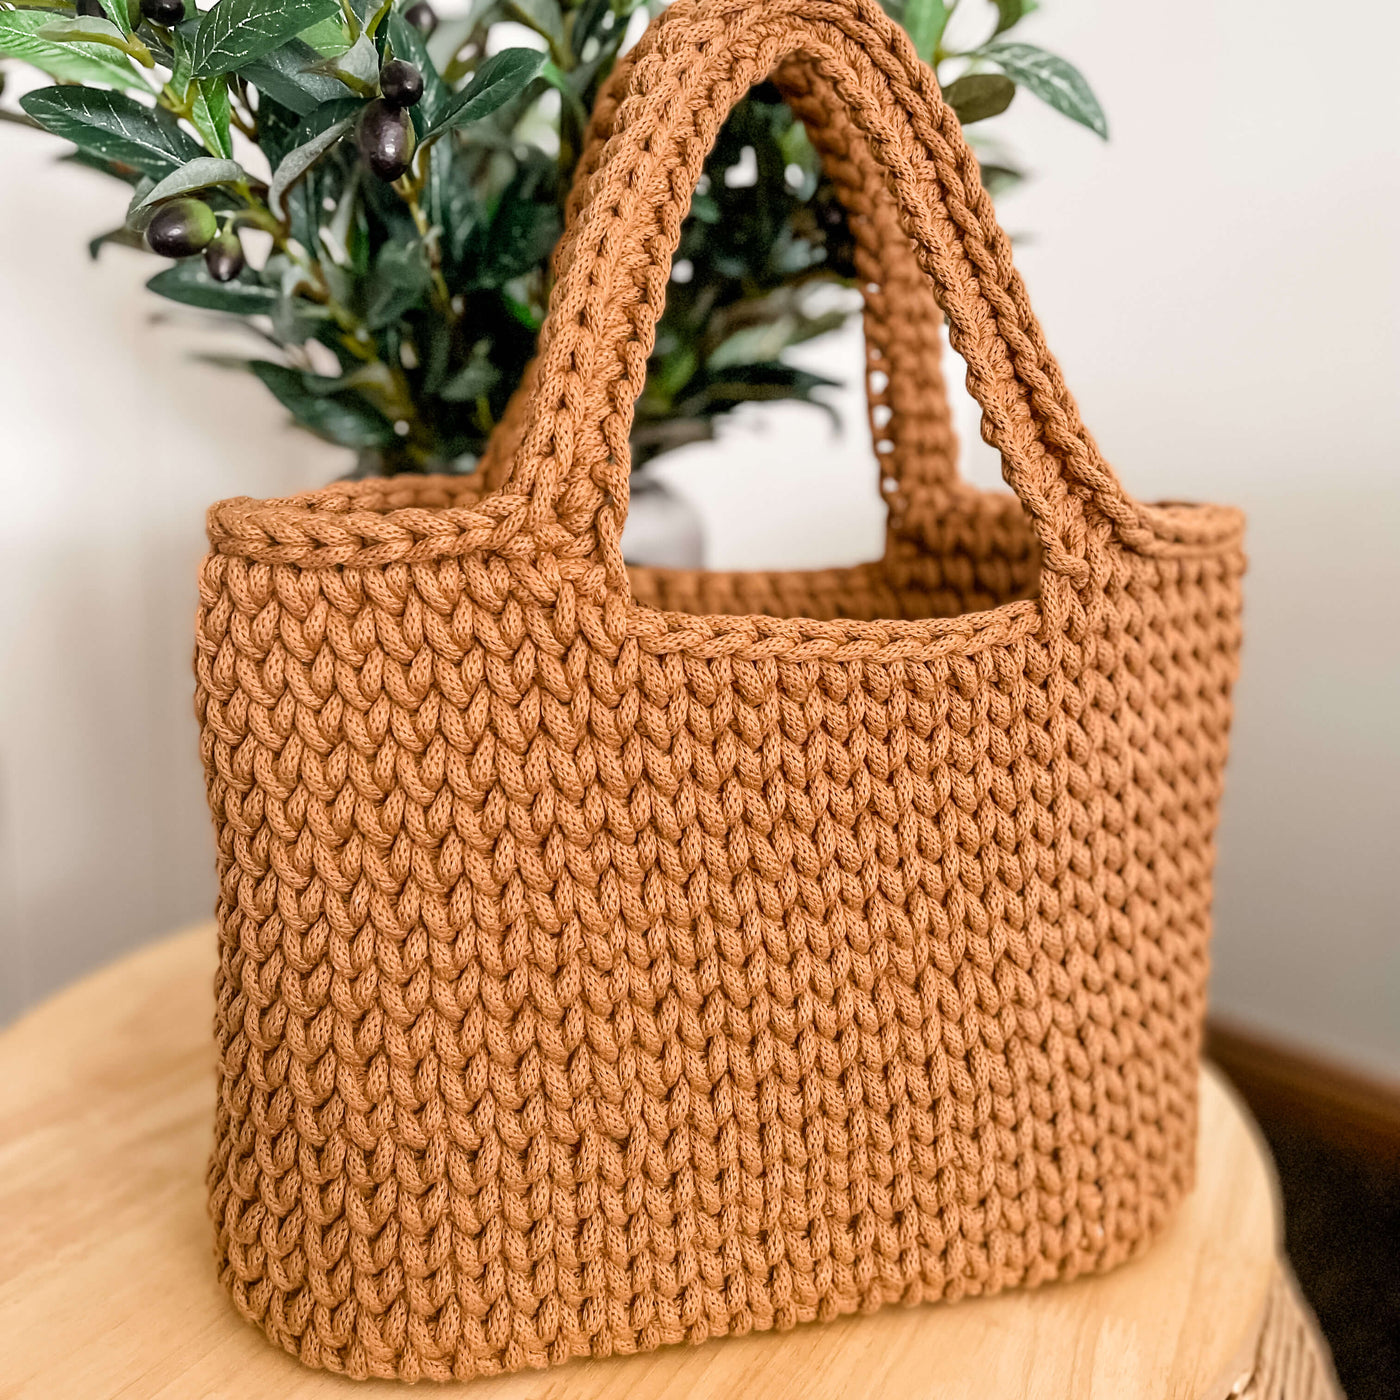 Caramel coloured Crochet Tote Bag with handles